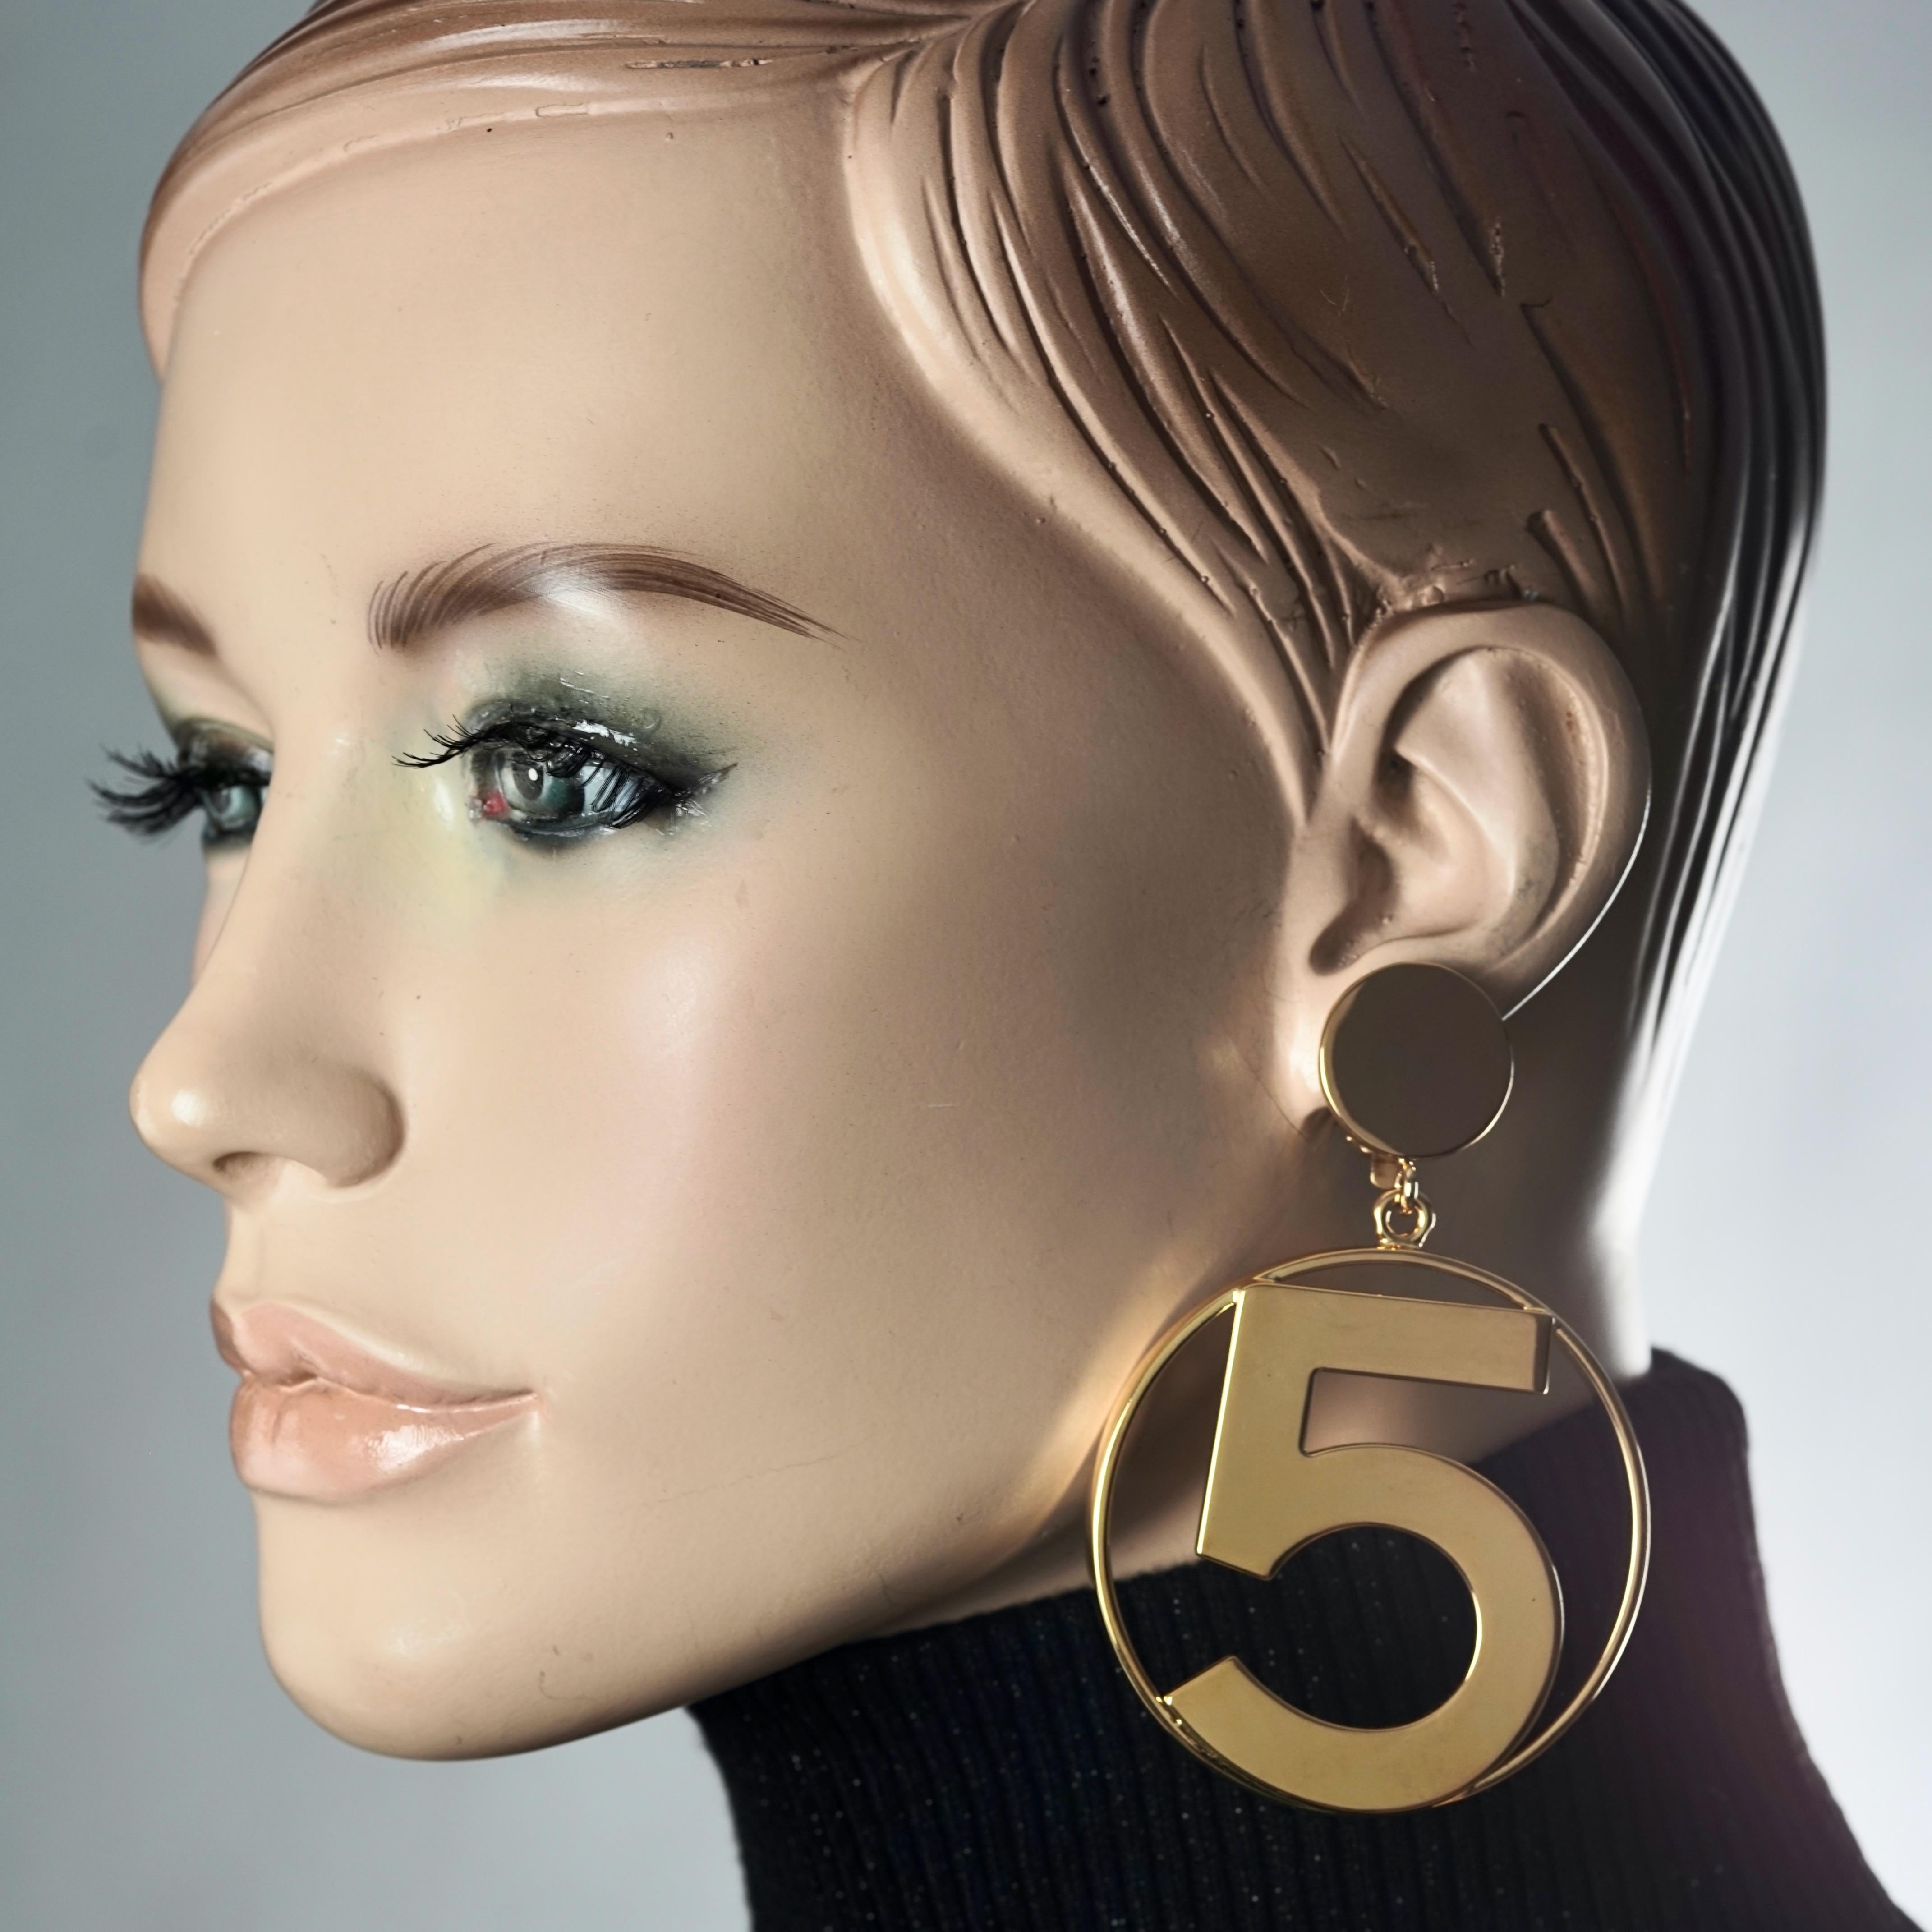 Vintage Jumbo CHANEL Iconic No 5 Hoop Earrings

Measurements:
Height: 3.35 inches (8.5 cm)
Width: 2.20 inches (5.6 cm)
Weight per Earring: 34 grams

Features:
- 100% Authentic CHANEL.
- Massive hoop earrings with No. 5 at the centre.
- Gold tone